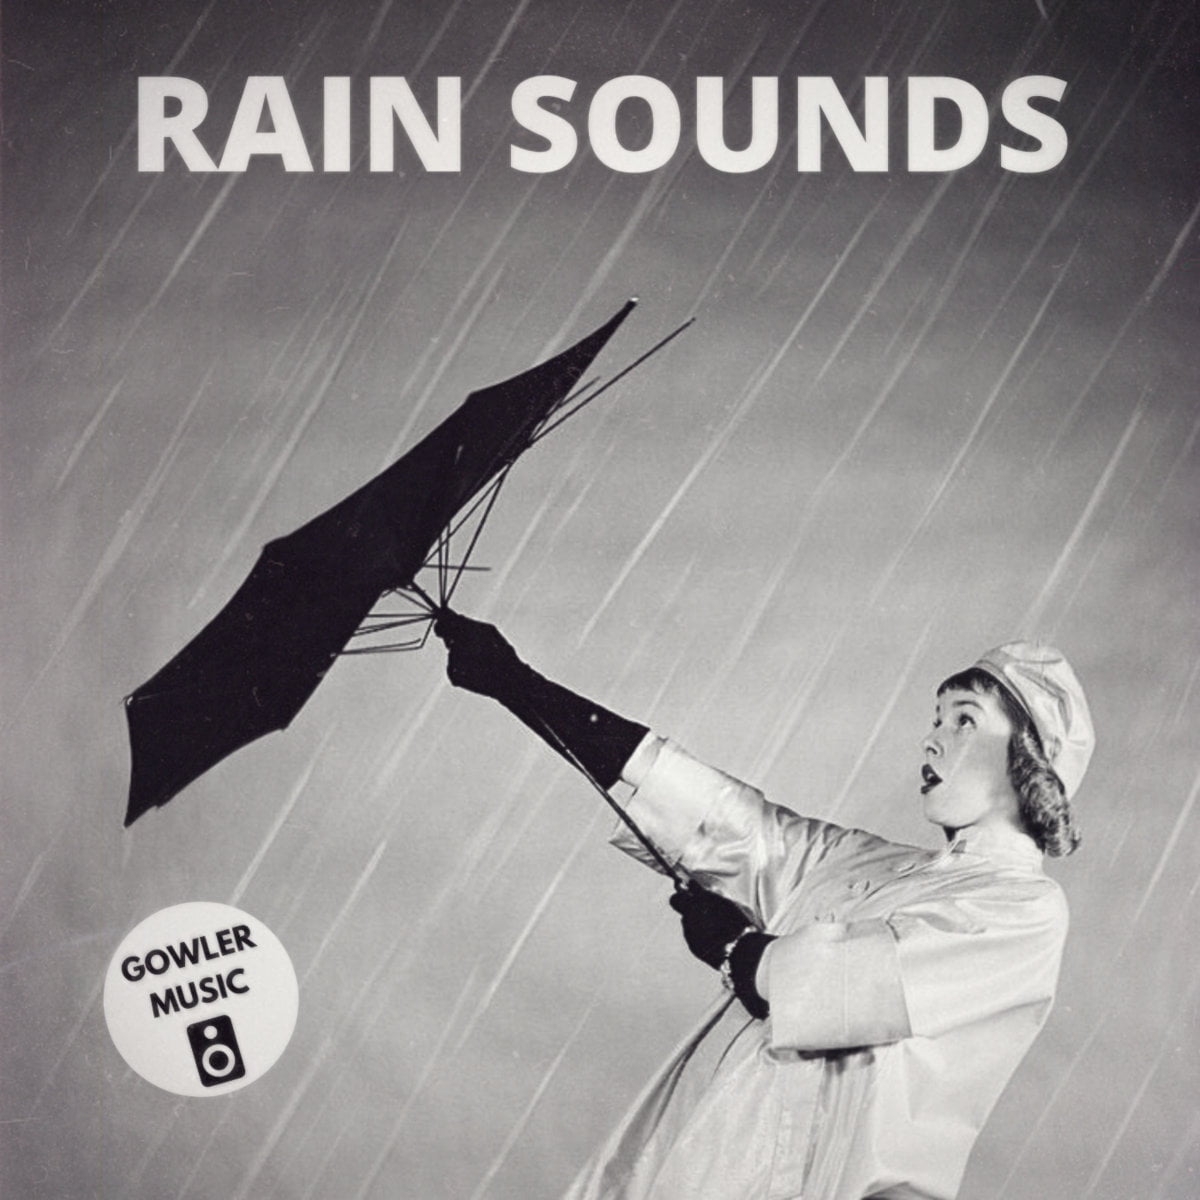 GowlerMusic releases Rain Sounds - Royalty Free Sound Effects